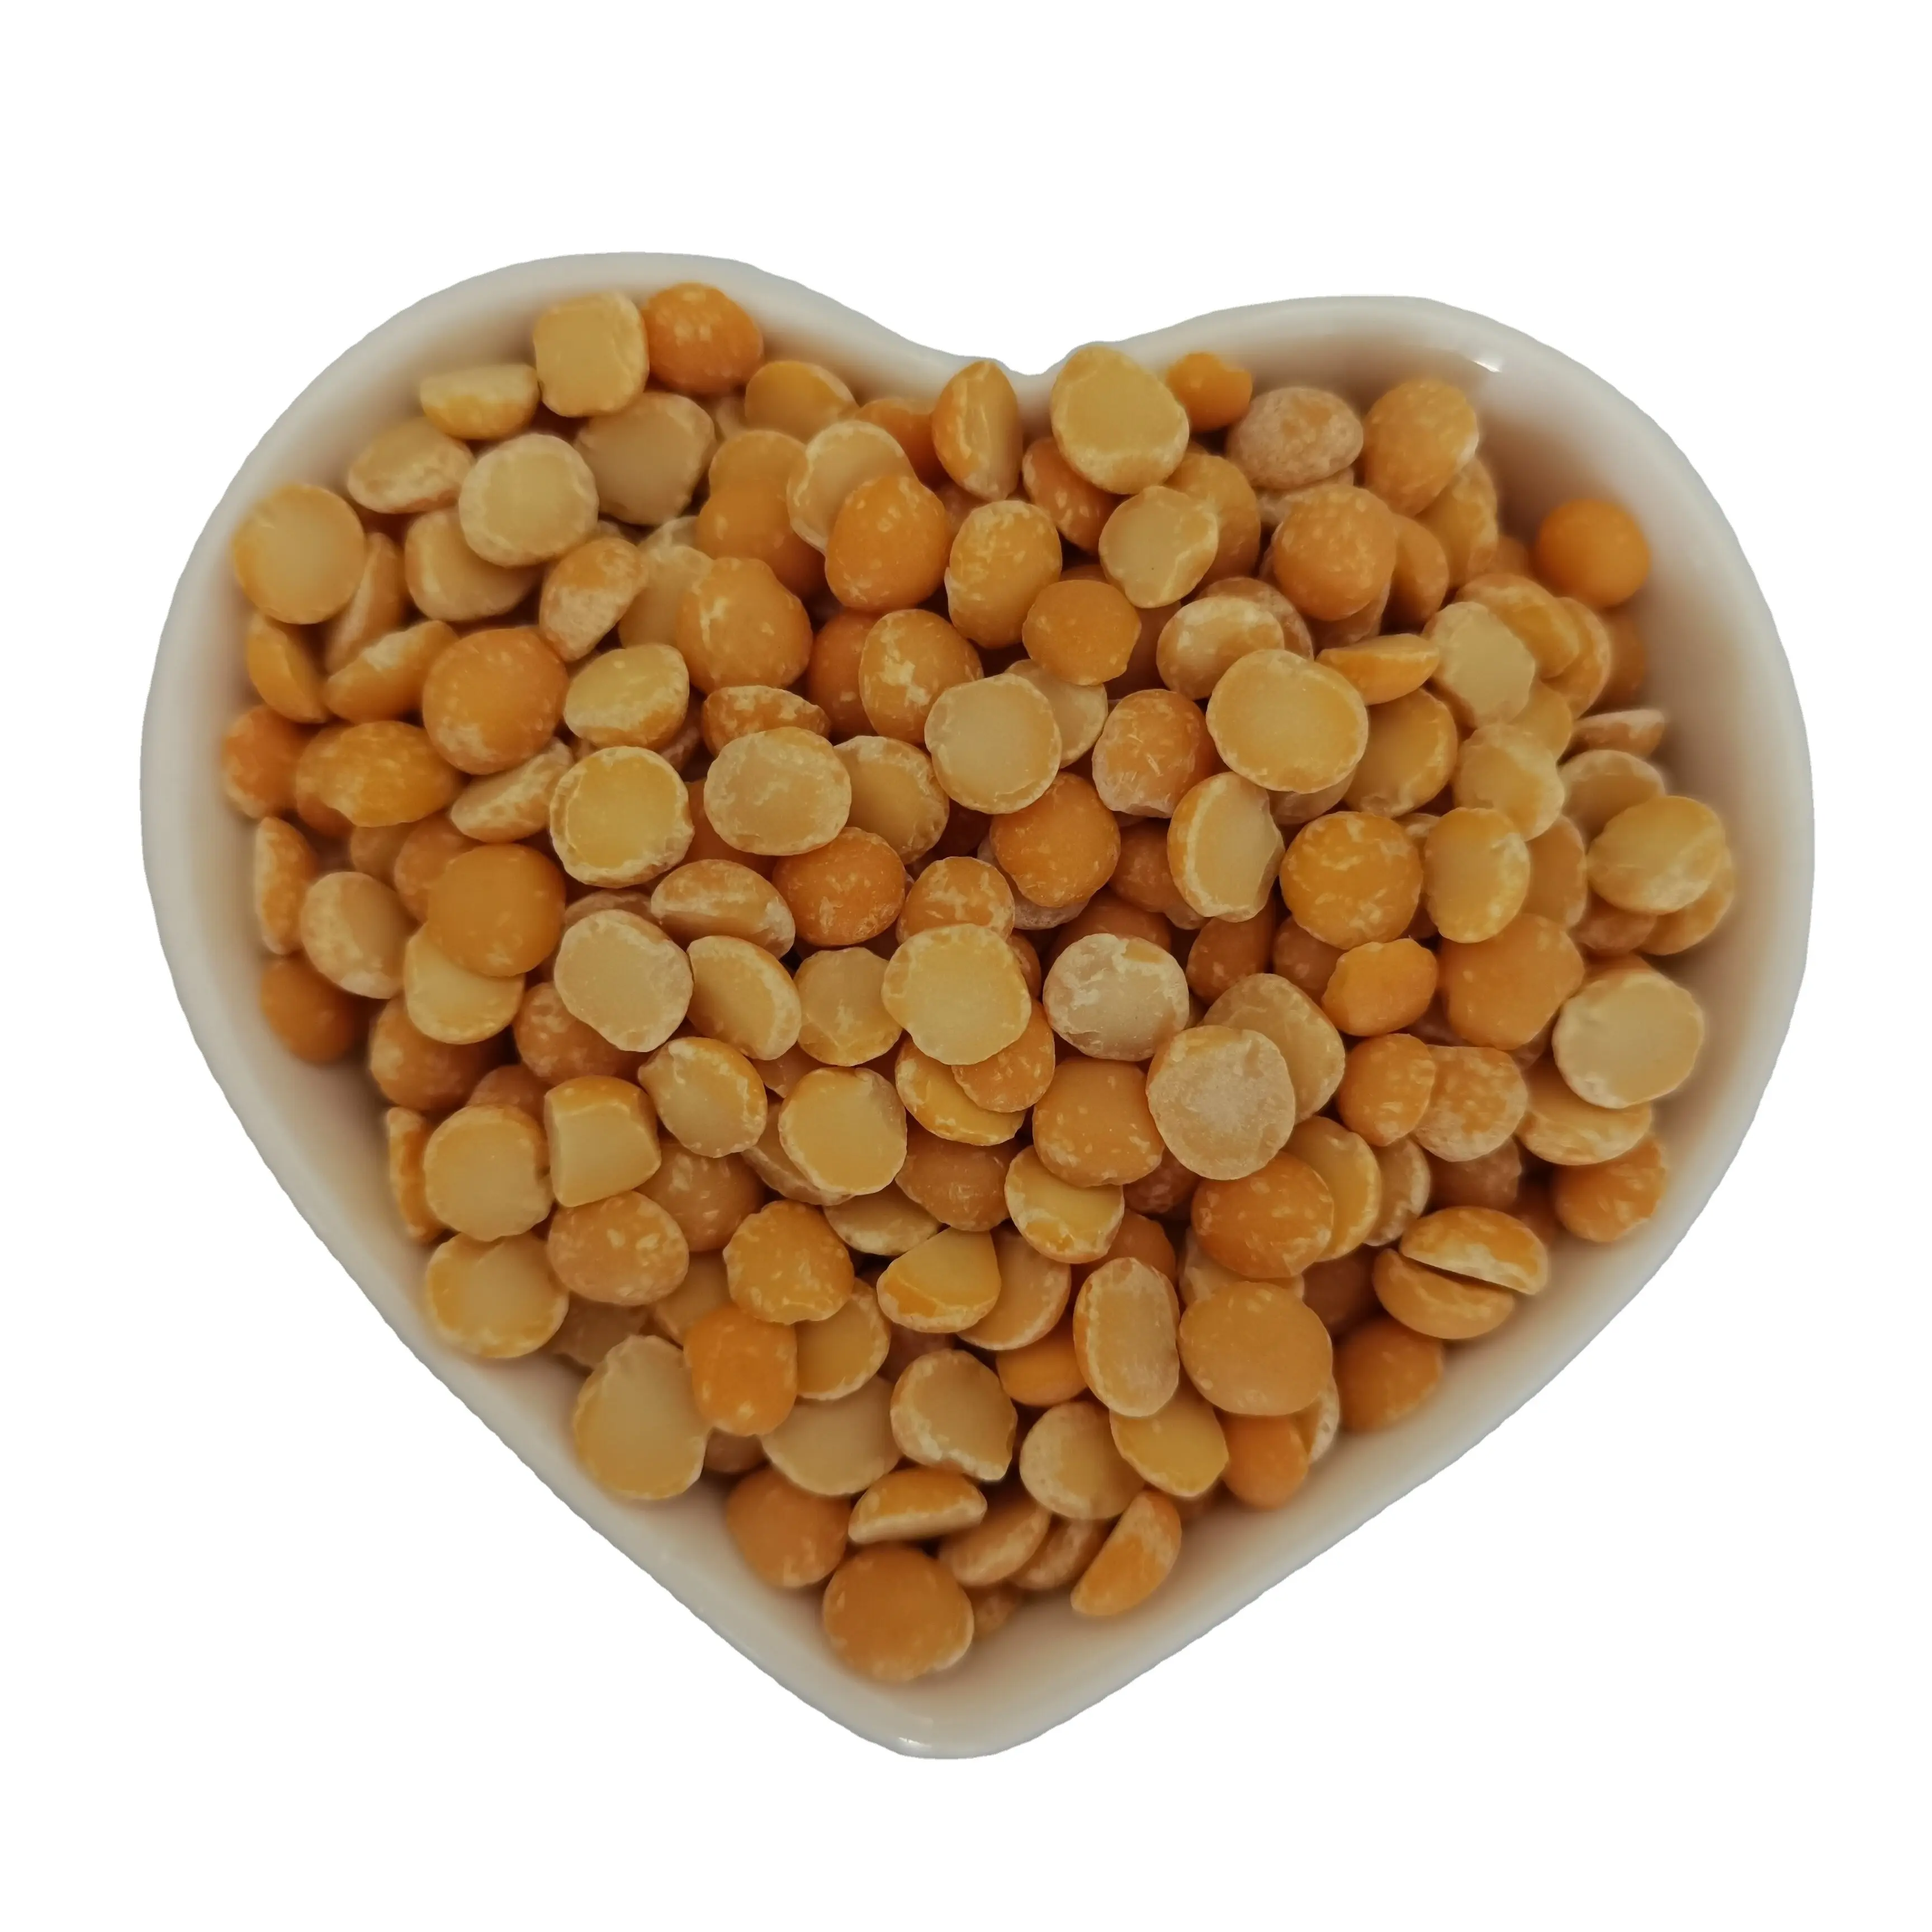 white pea new crop clean split peas with competitive price natural healthy non gmo yellow/green split peas